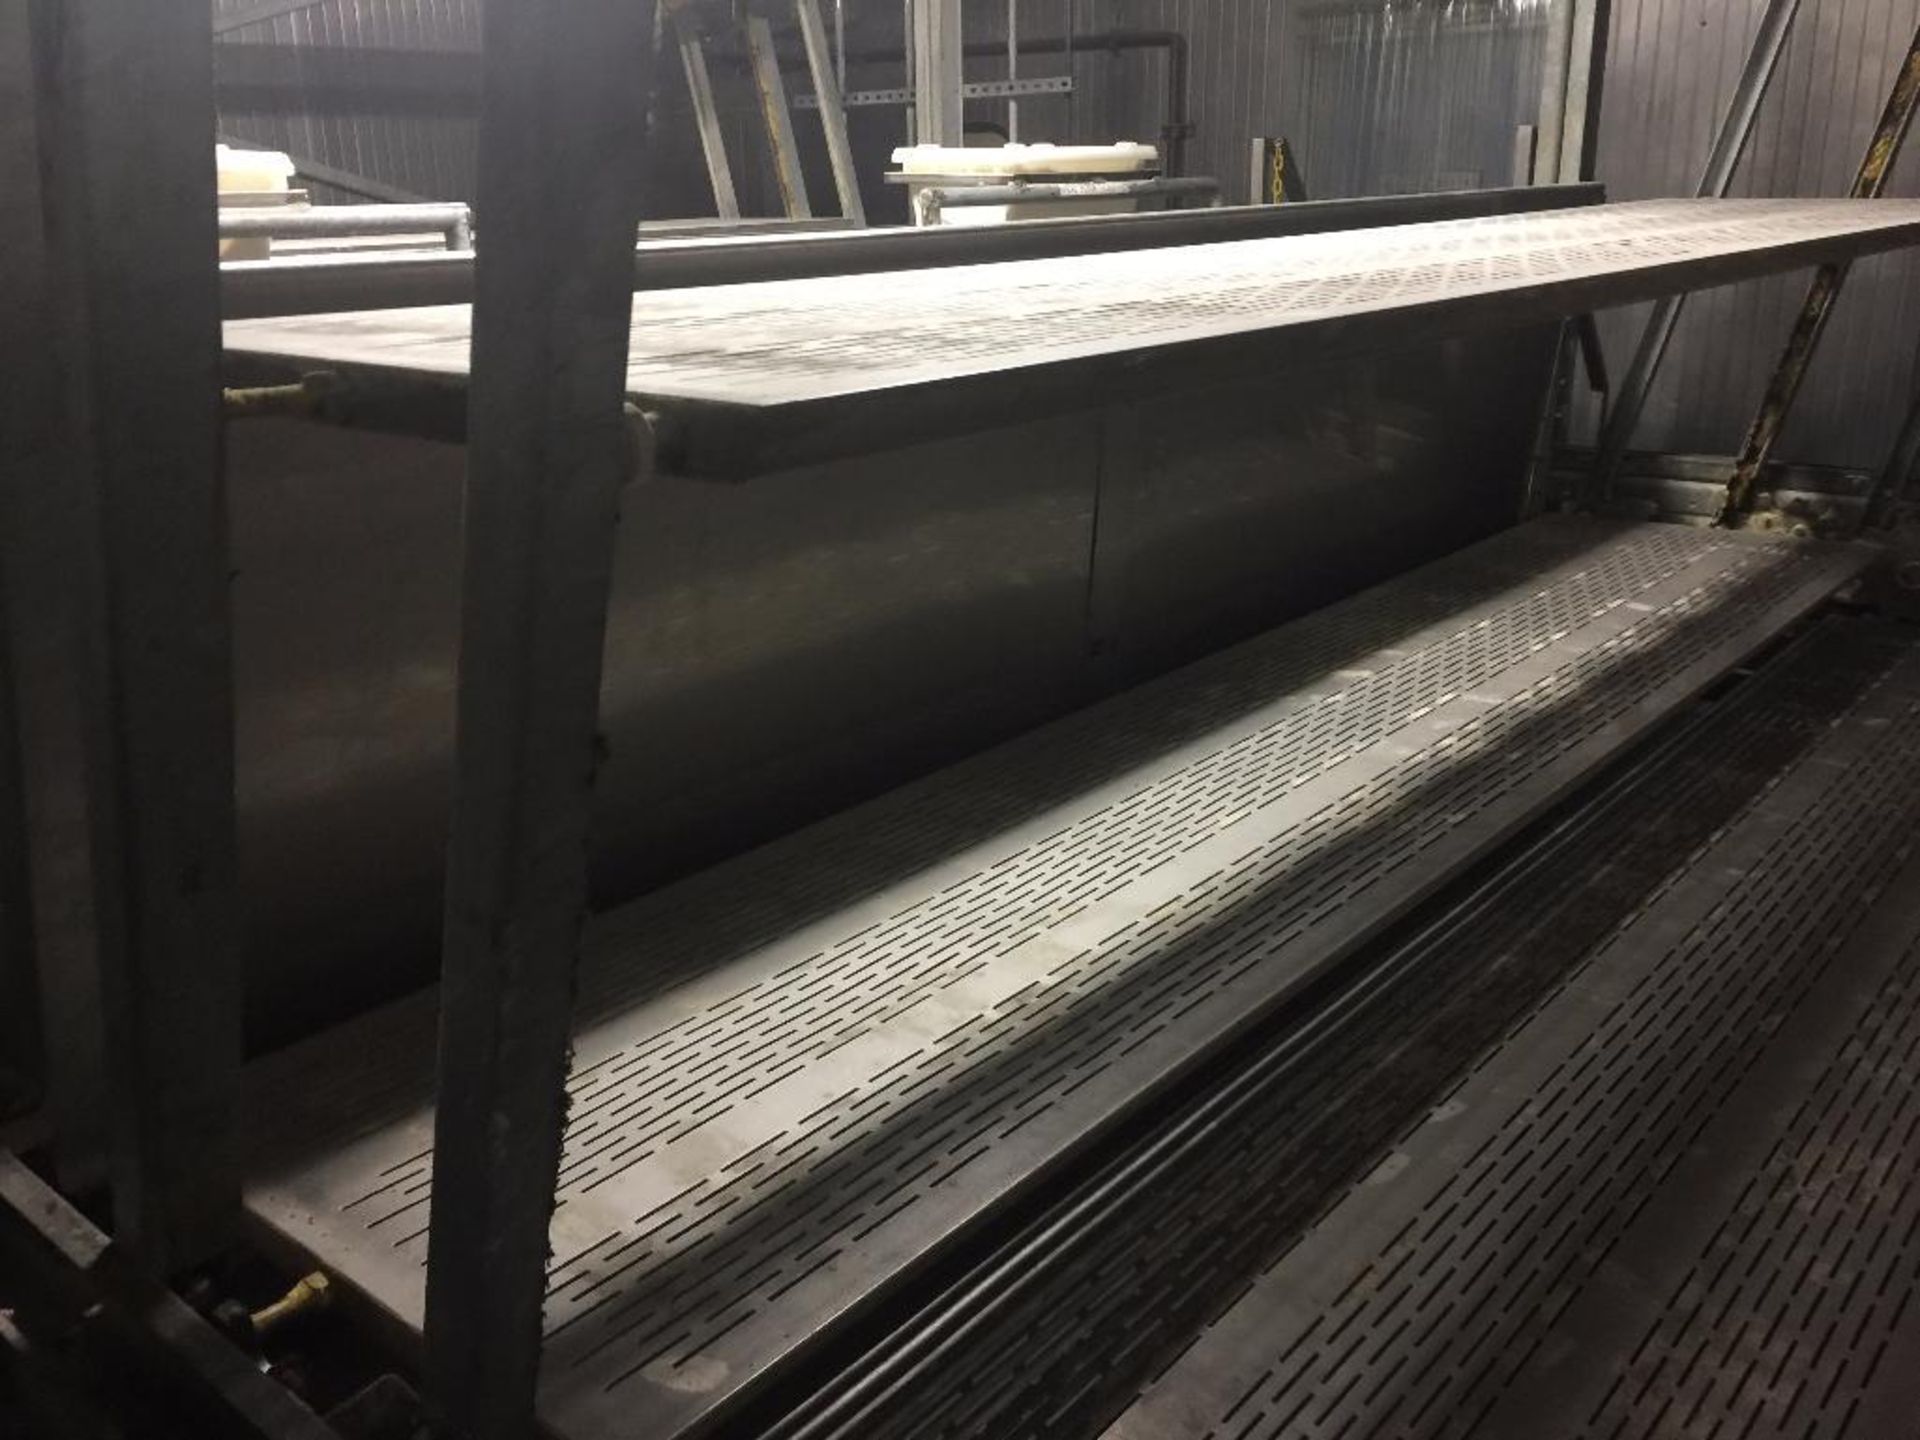 1998 Sasib proof box, 138 in. wide x 150 ft. long x 6 rows, 5 hr. proof time, each slat is 18 in. wi - Image 18 of 36